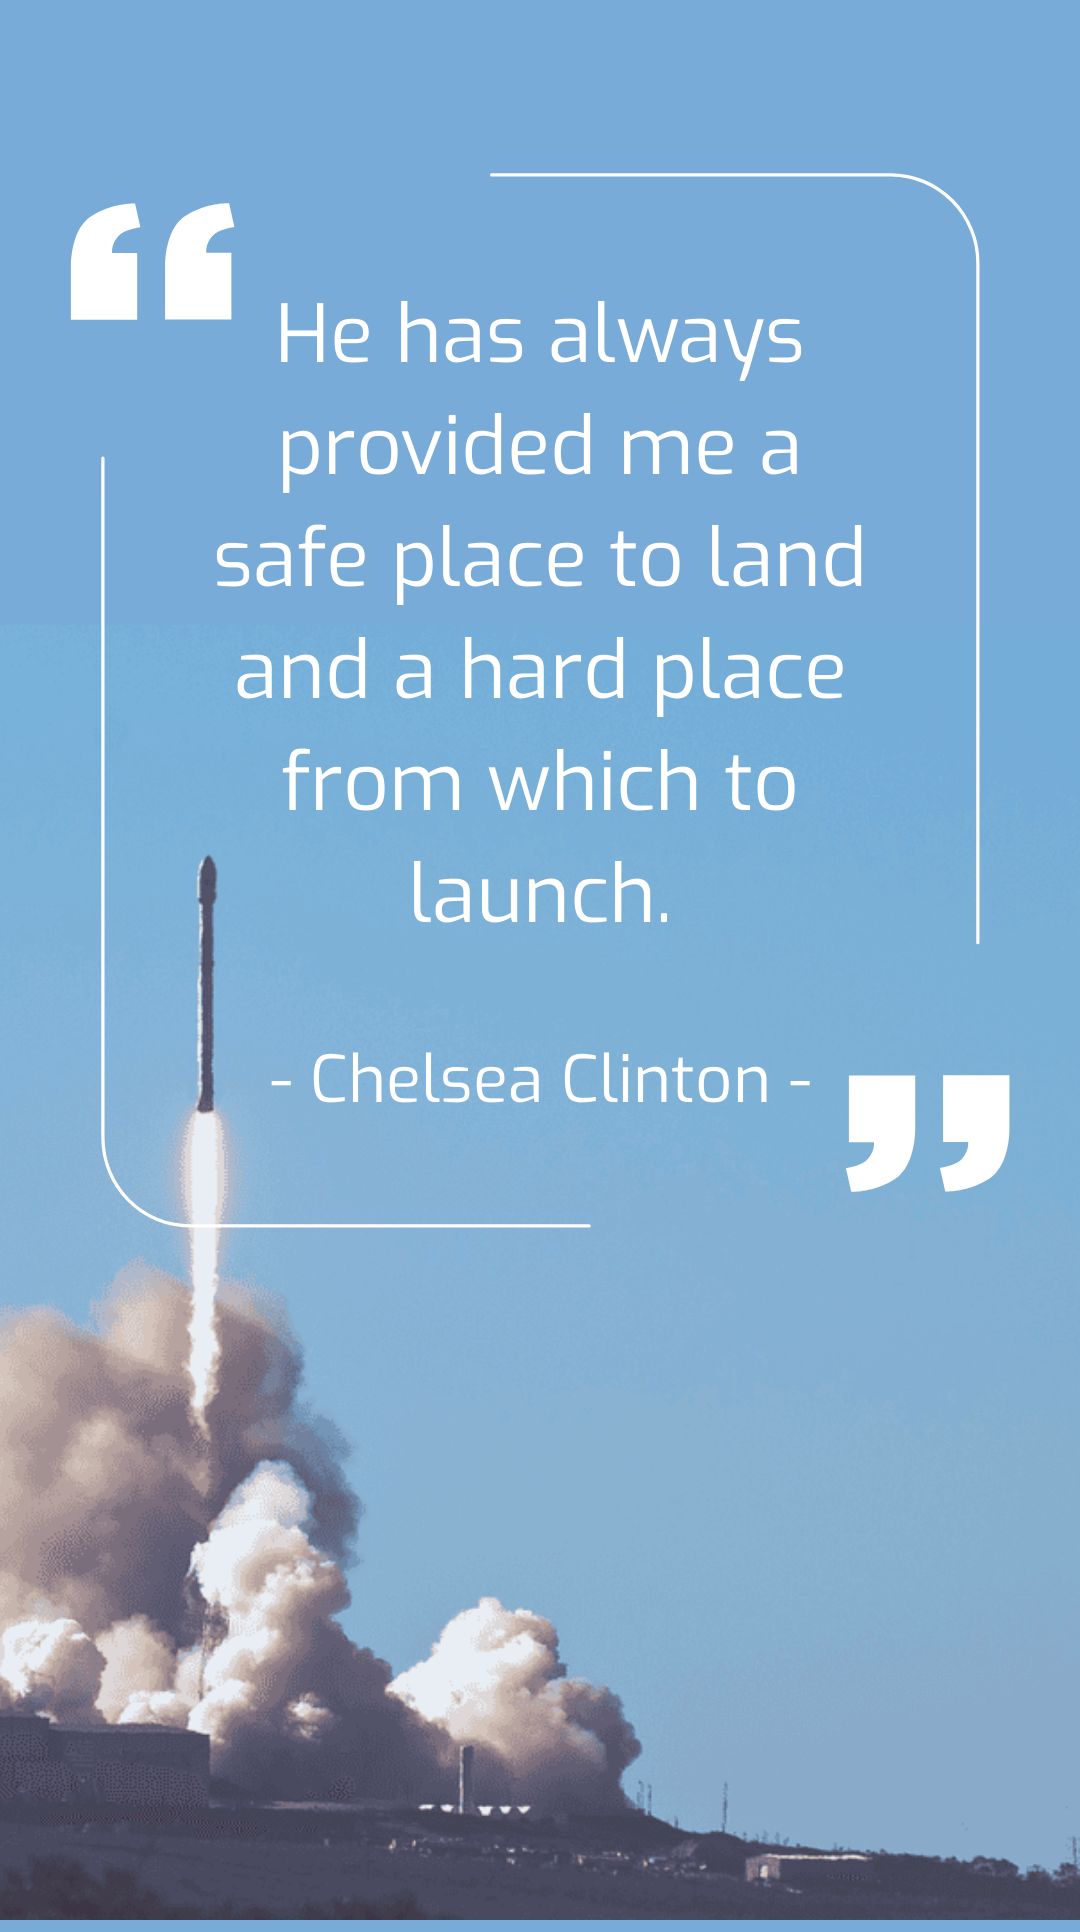 Chelsea Clinton - He has always provided me a safe place to land and a hard place from which to launch.